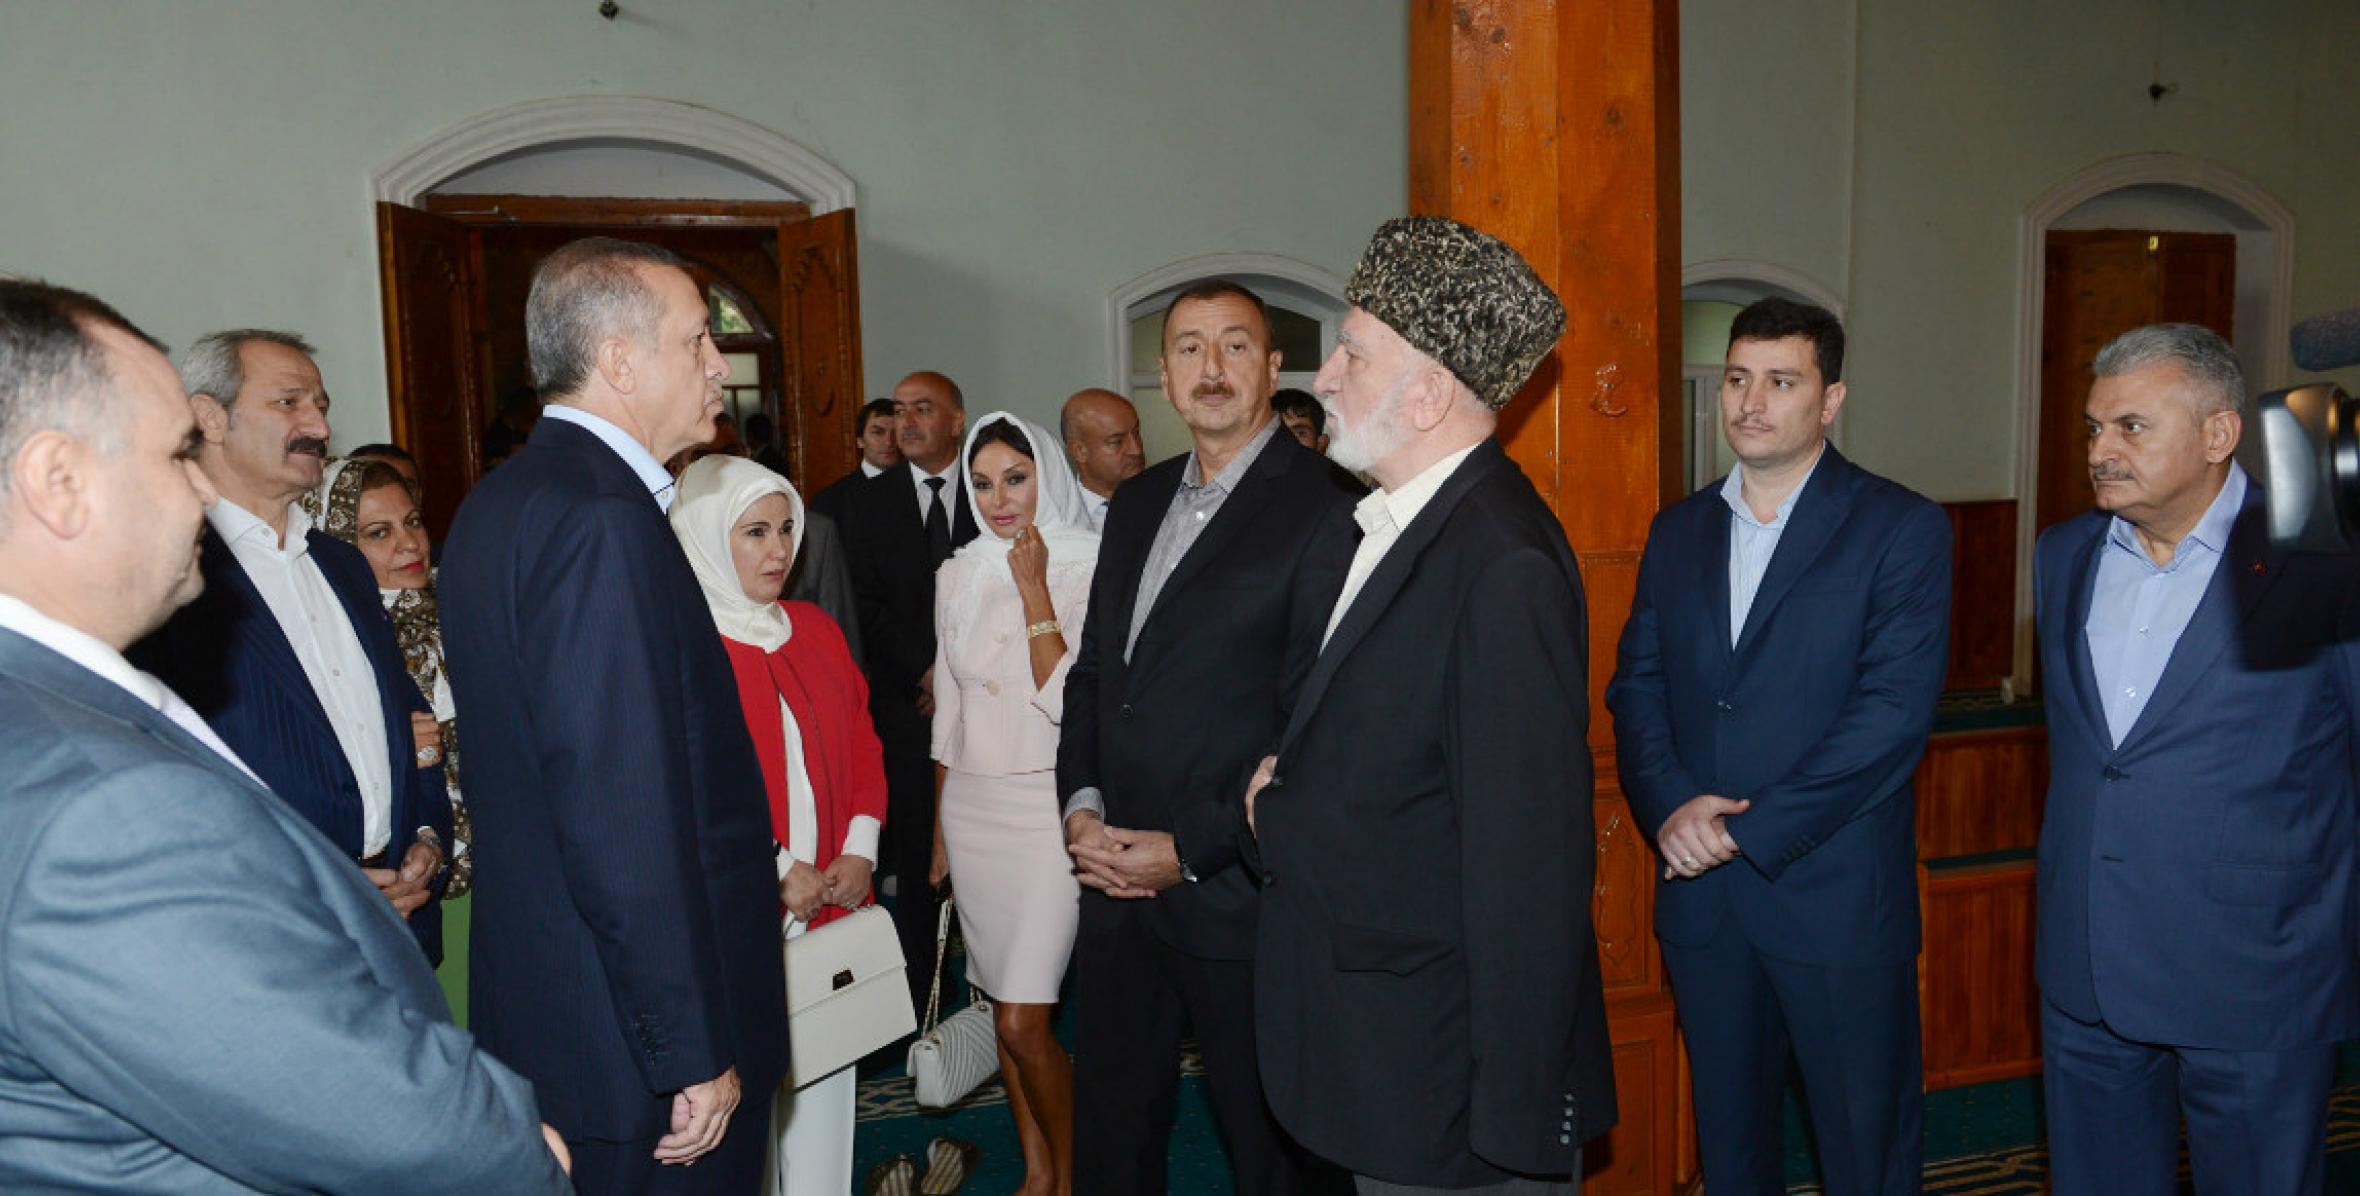 Ilham Aliyev and Prime Minister Recep Tayyip Erdogan visited the 19th century historical and architectural monument – the Shaki Juma Mosque